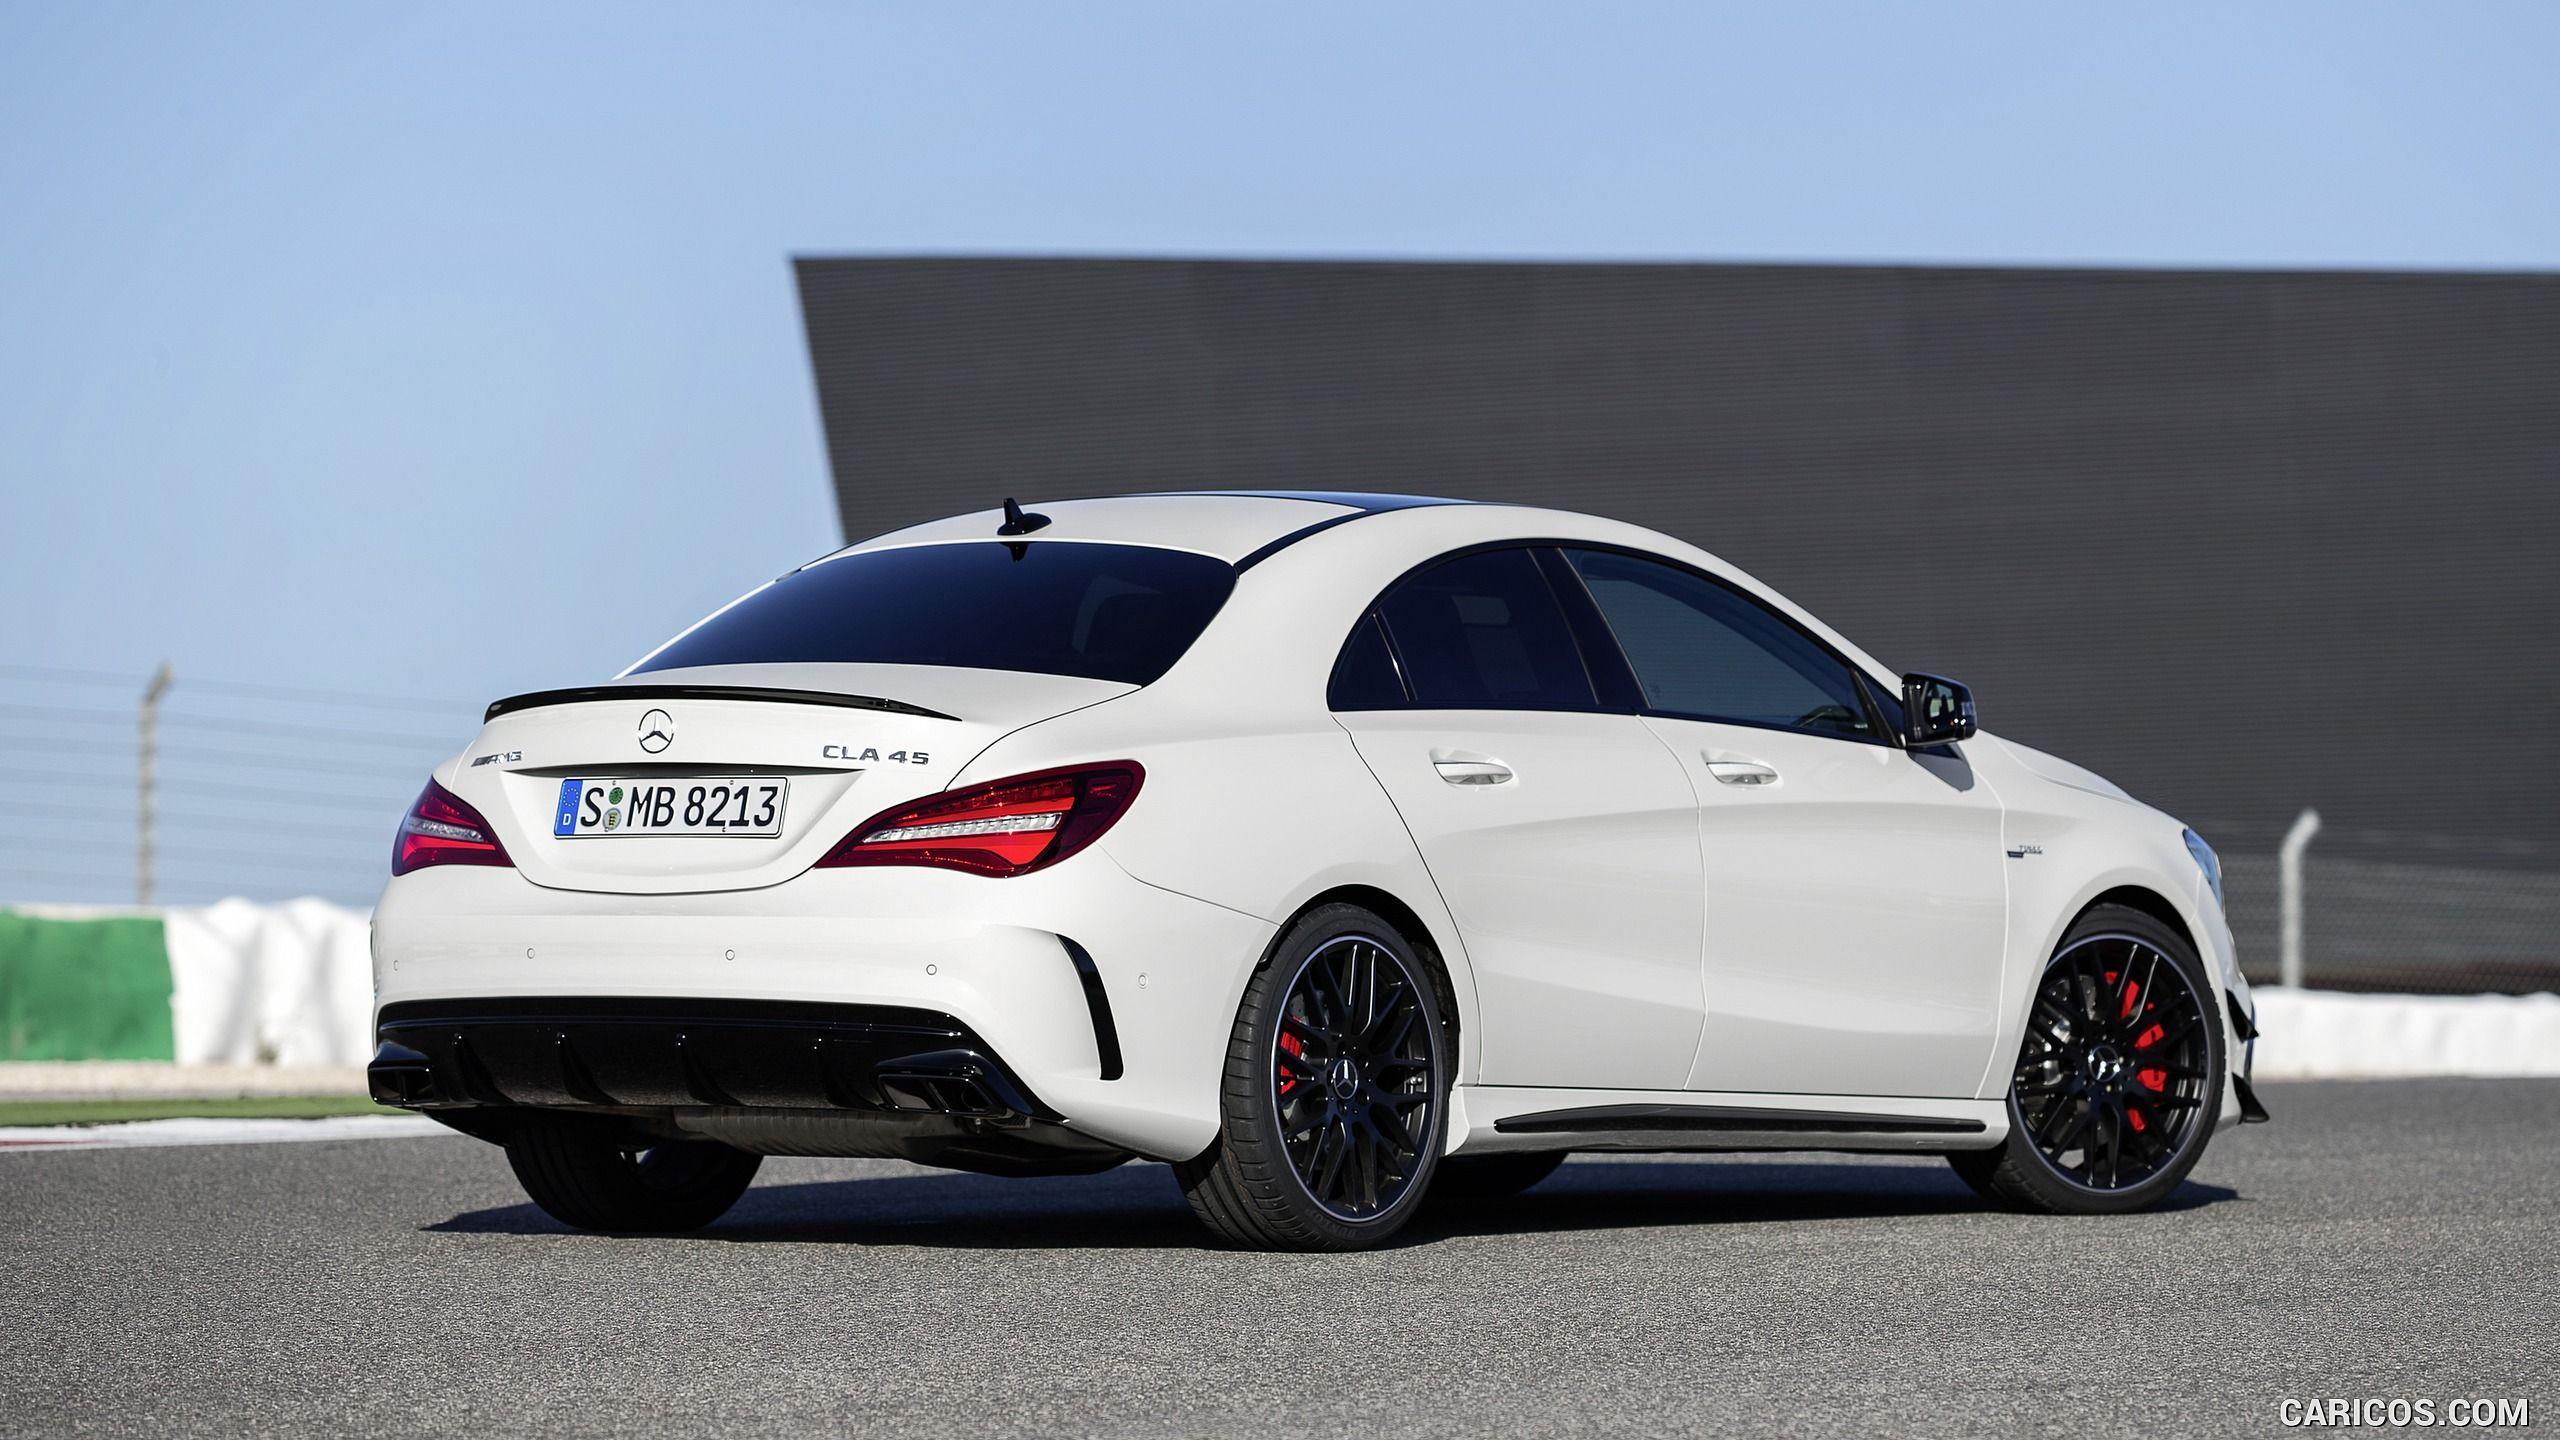 Mercedes AMG CLA 45 Wallpaper. Things To Fill The Garage